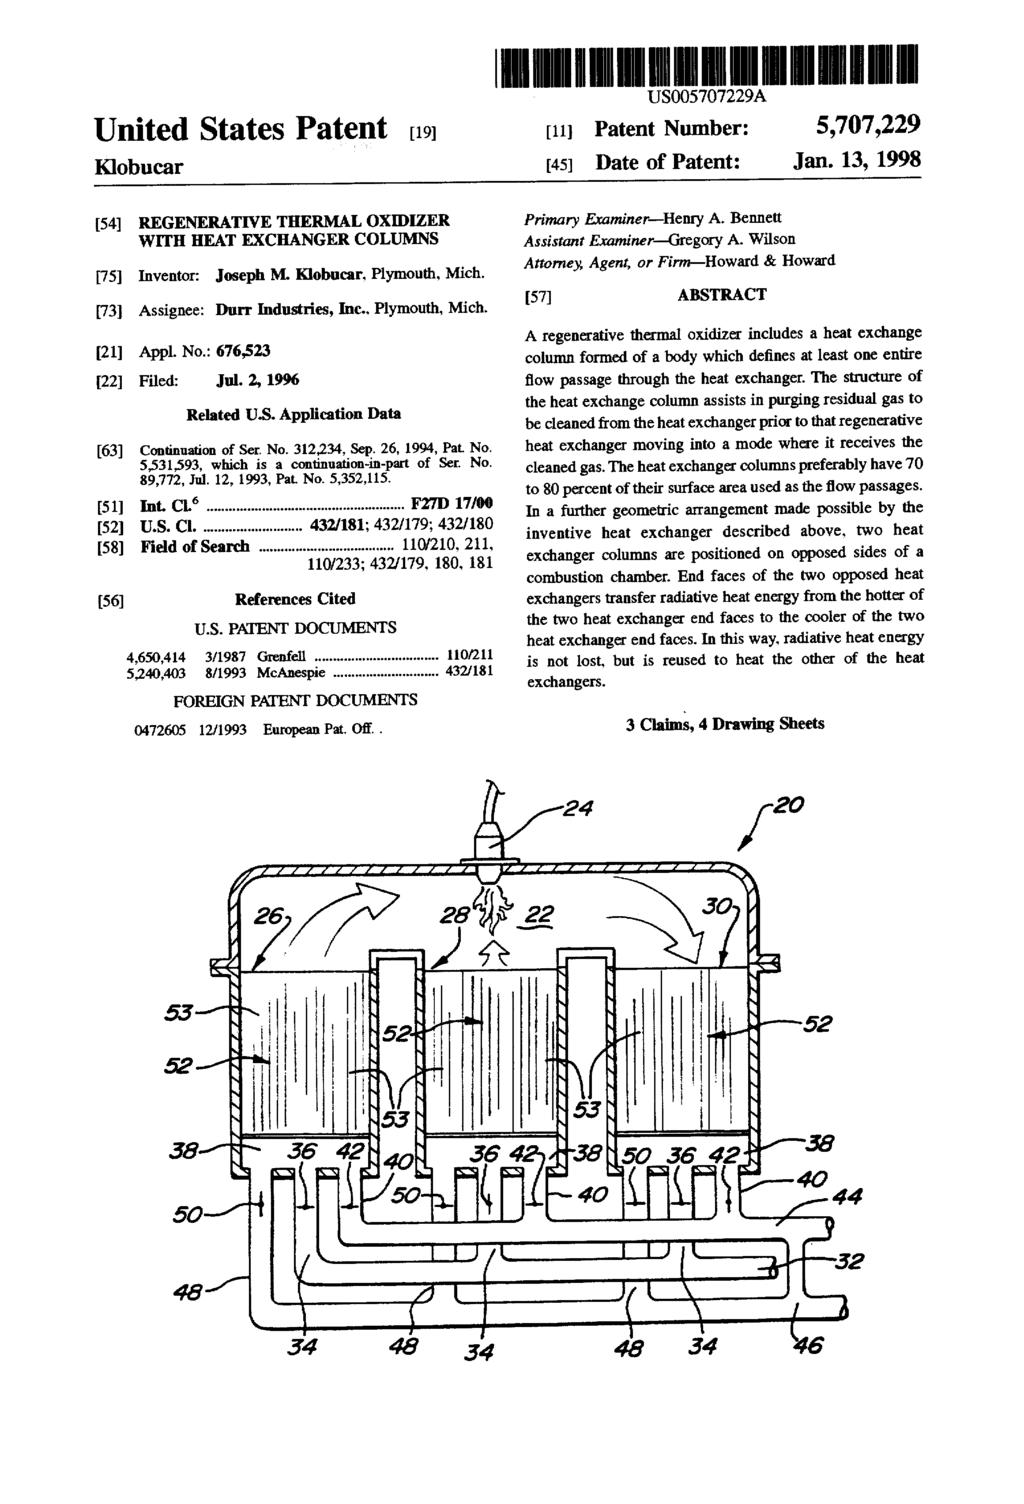 United States Patent (19) Klobucar 54 REGENERATIVE THERMAL OXDZER WITH HEAT EXCHANGER COLUMNS 75 Inventor: Joseph M. Klobucar, Plymouth, Mich. 73 Assignee: Durr Industries, Inc., Plymouth, Mich. (21) Appl.